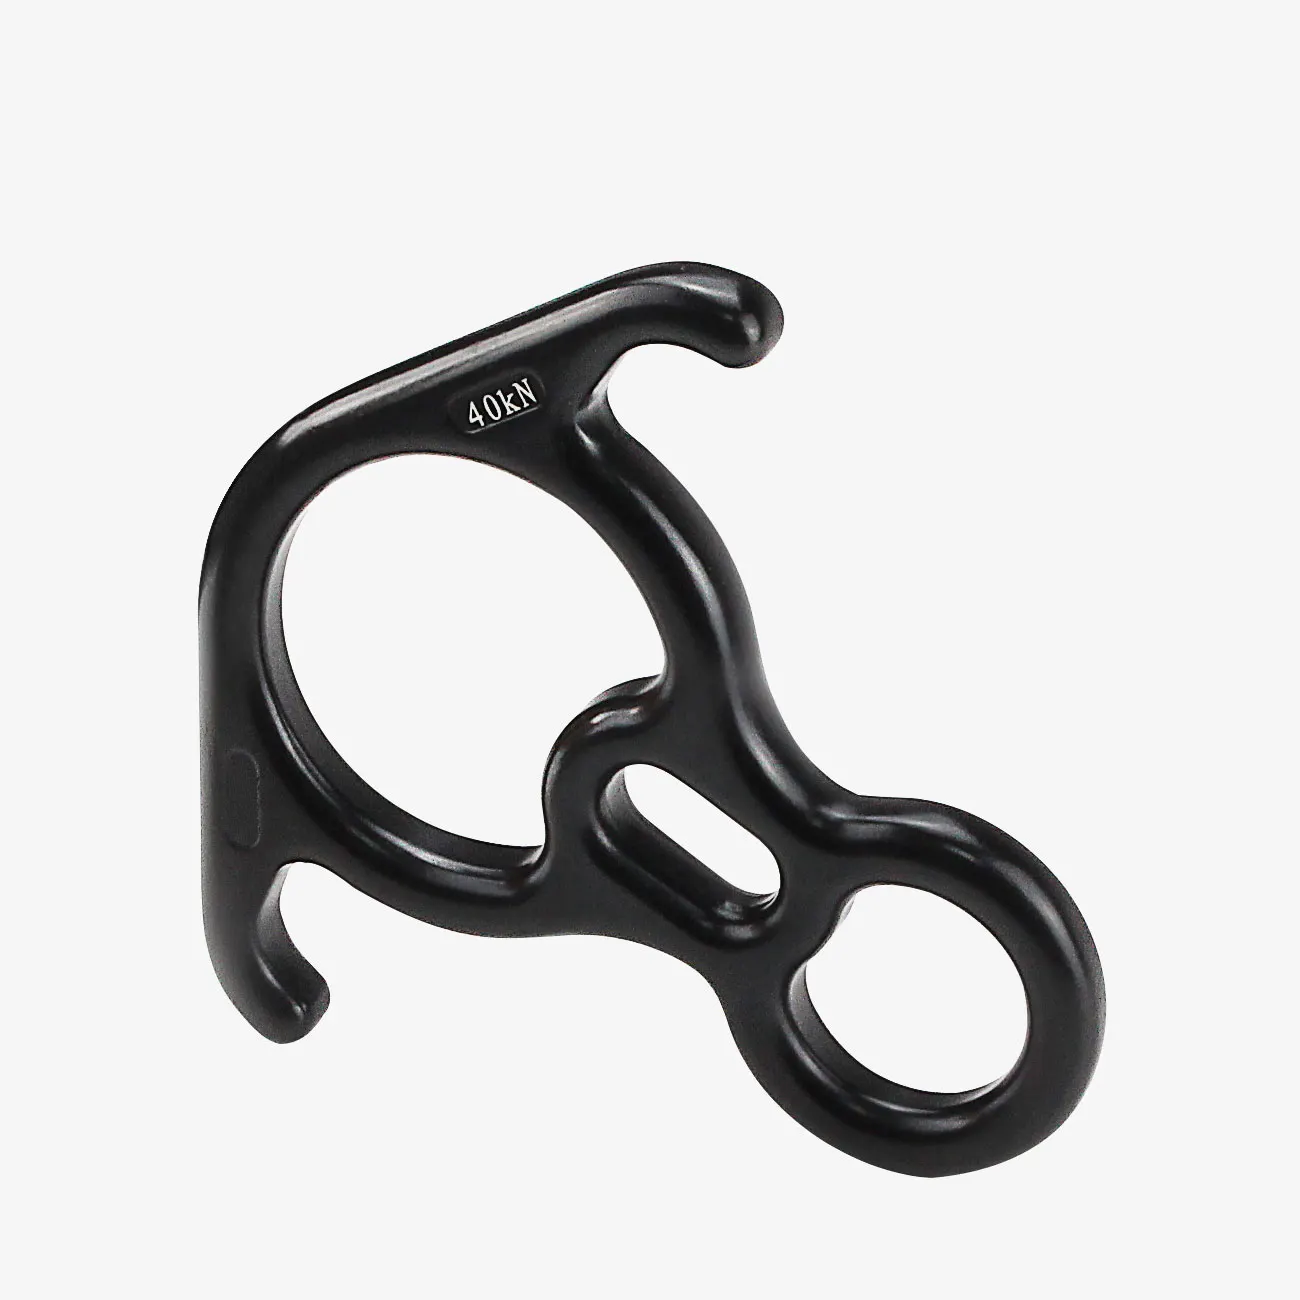 High strength and good price Rock clmbing safety rescue rappeling figure 8 ring rope descender